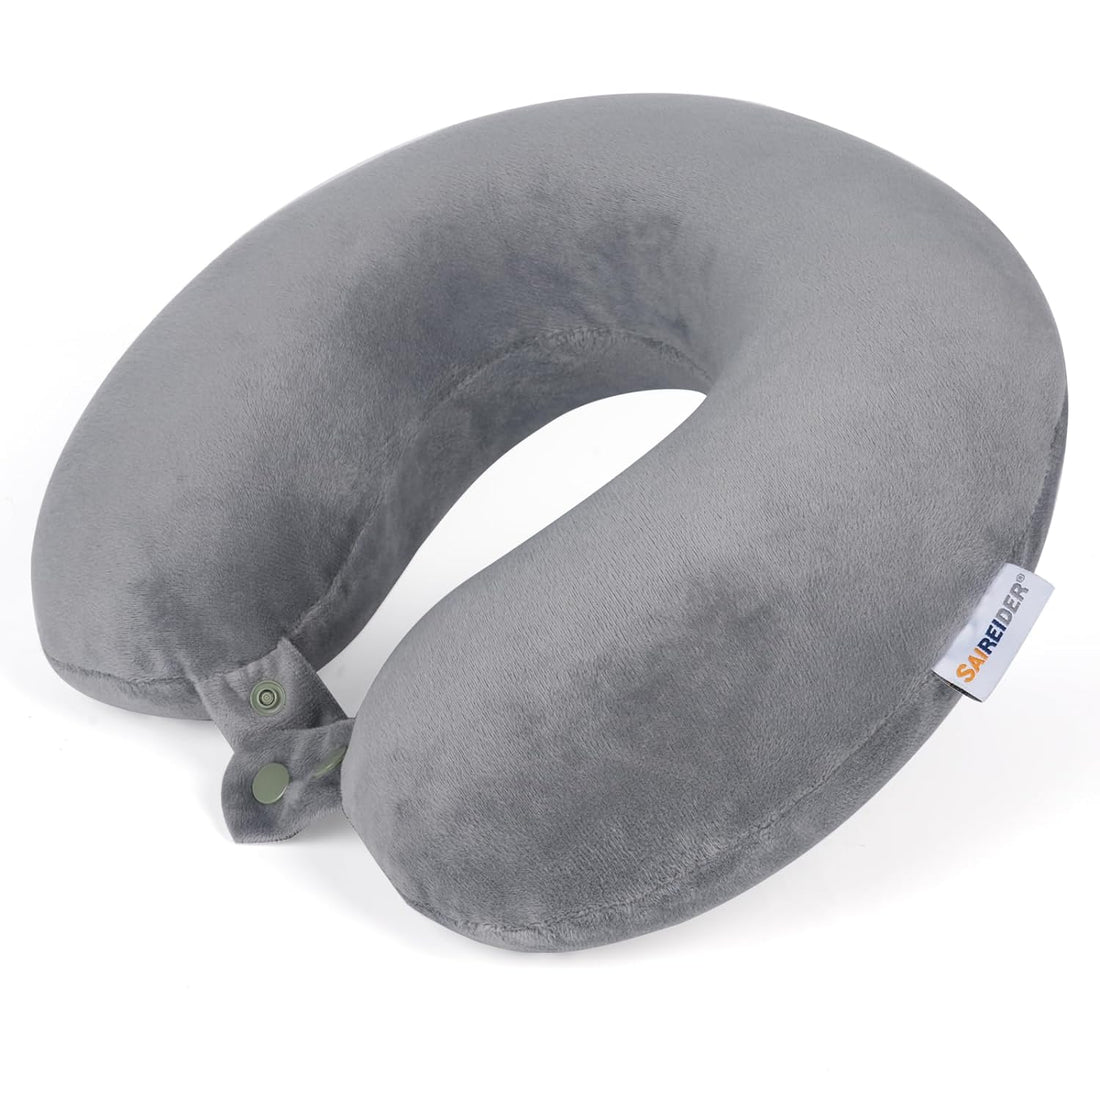 SAIREIDER Airplane Pillow 100% Memory Foam Neck Pillow for Airplanes Flight Rest Best Adjustable Travel Neck Support Pillows-Prevent The Heads from Falling Forward (Grey)